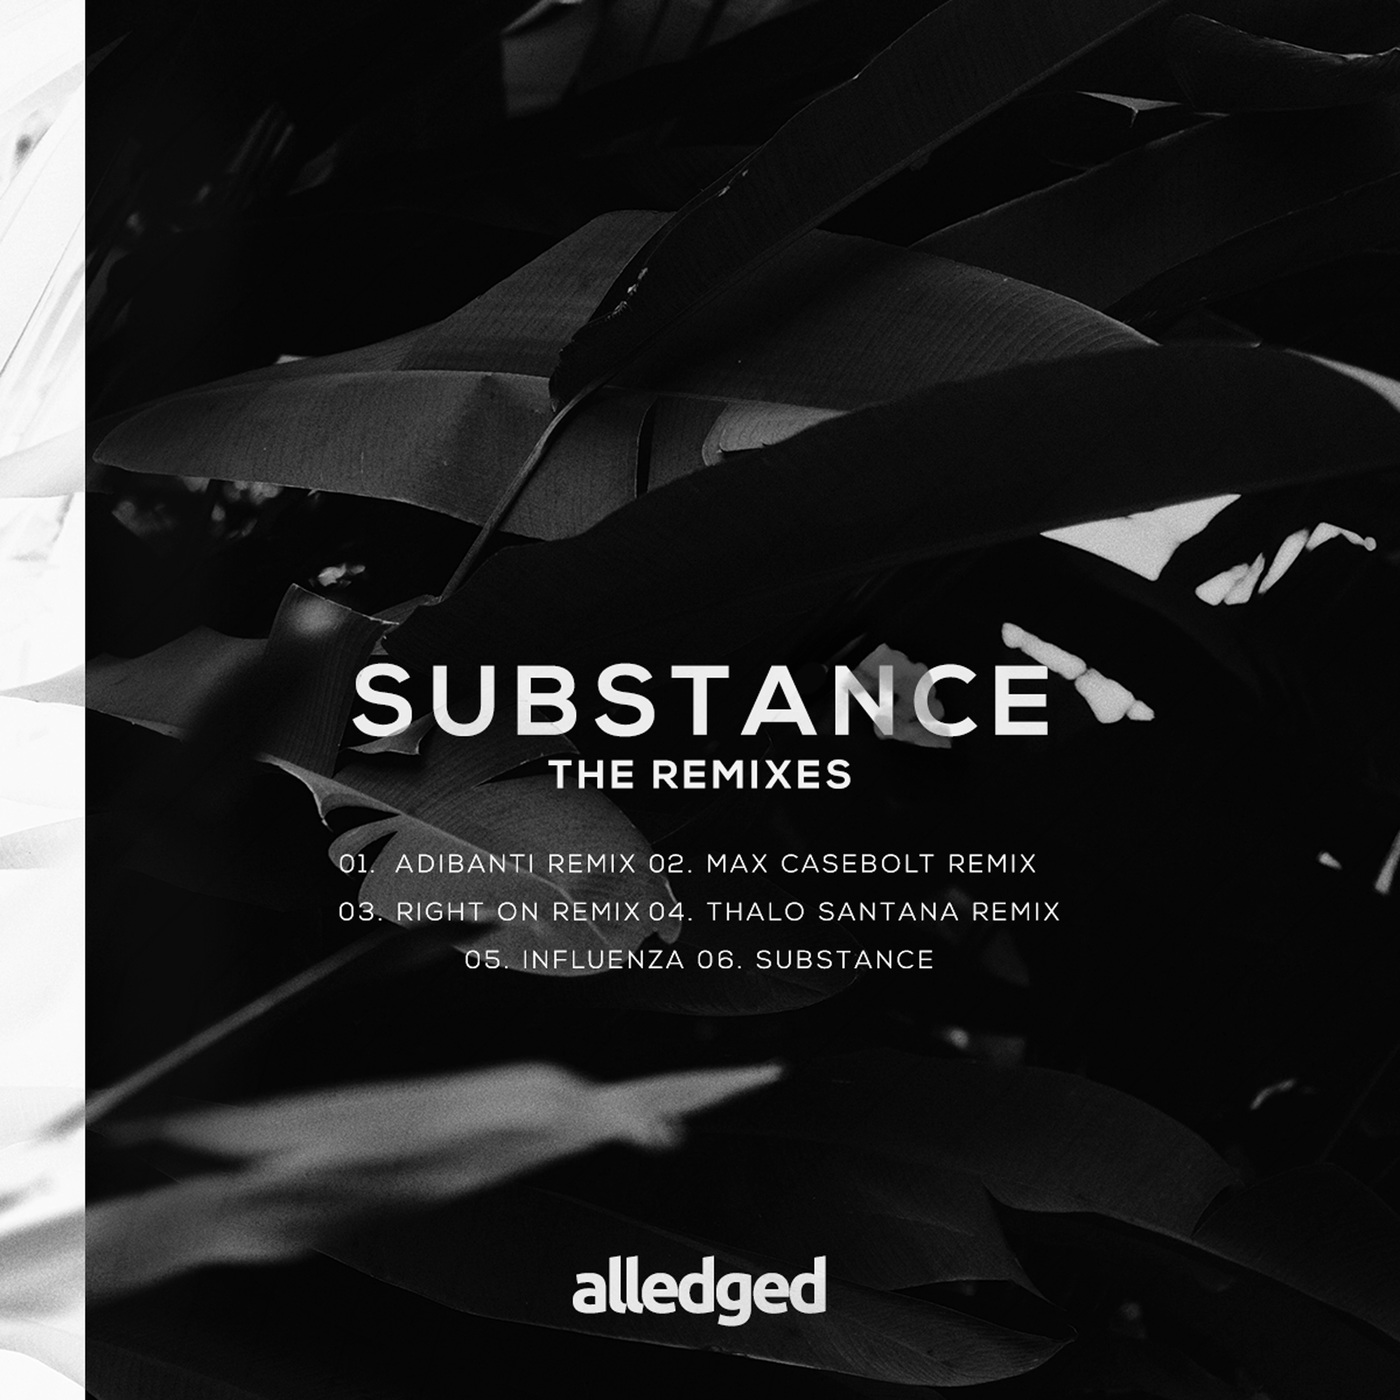 Djoko - Substance - The Remixes / alledged